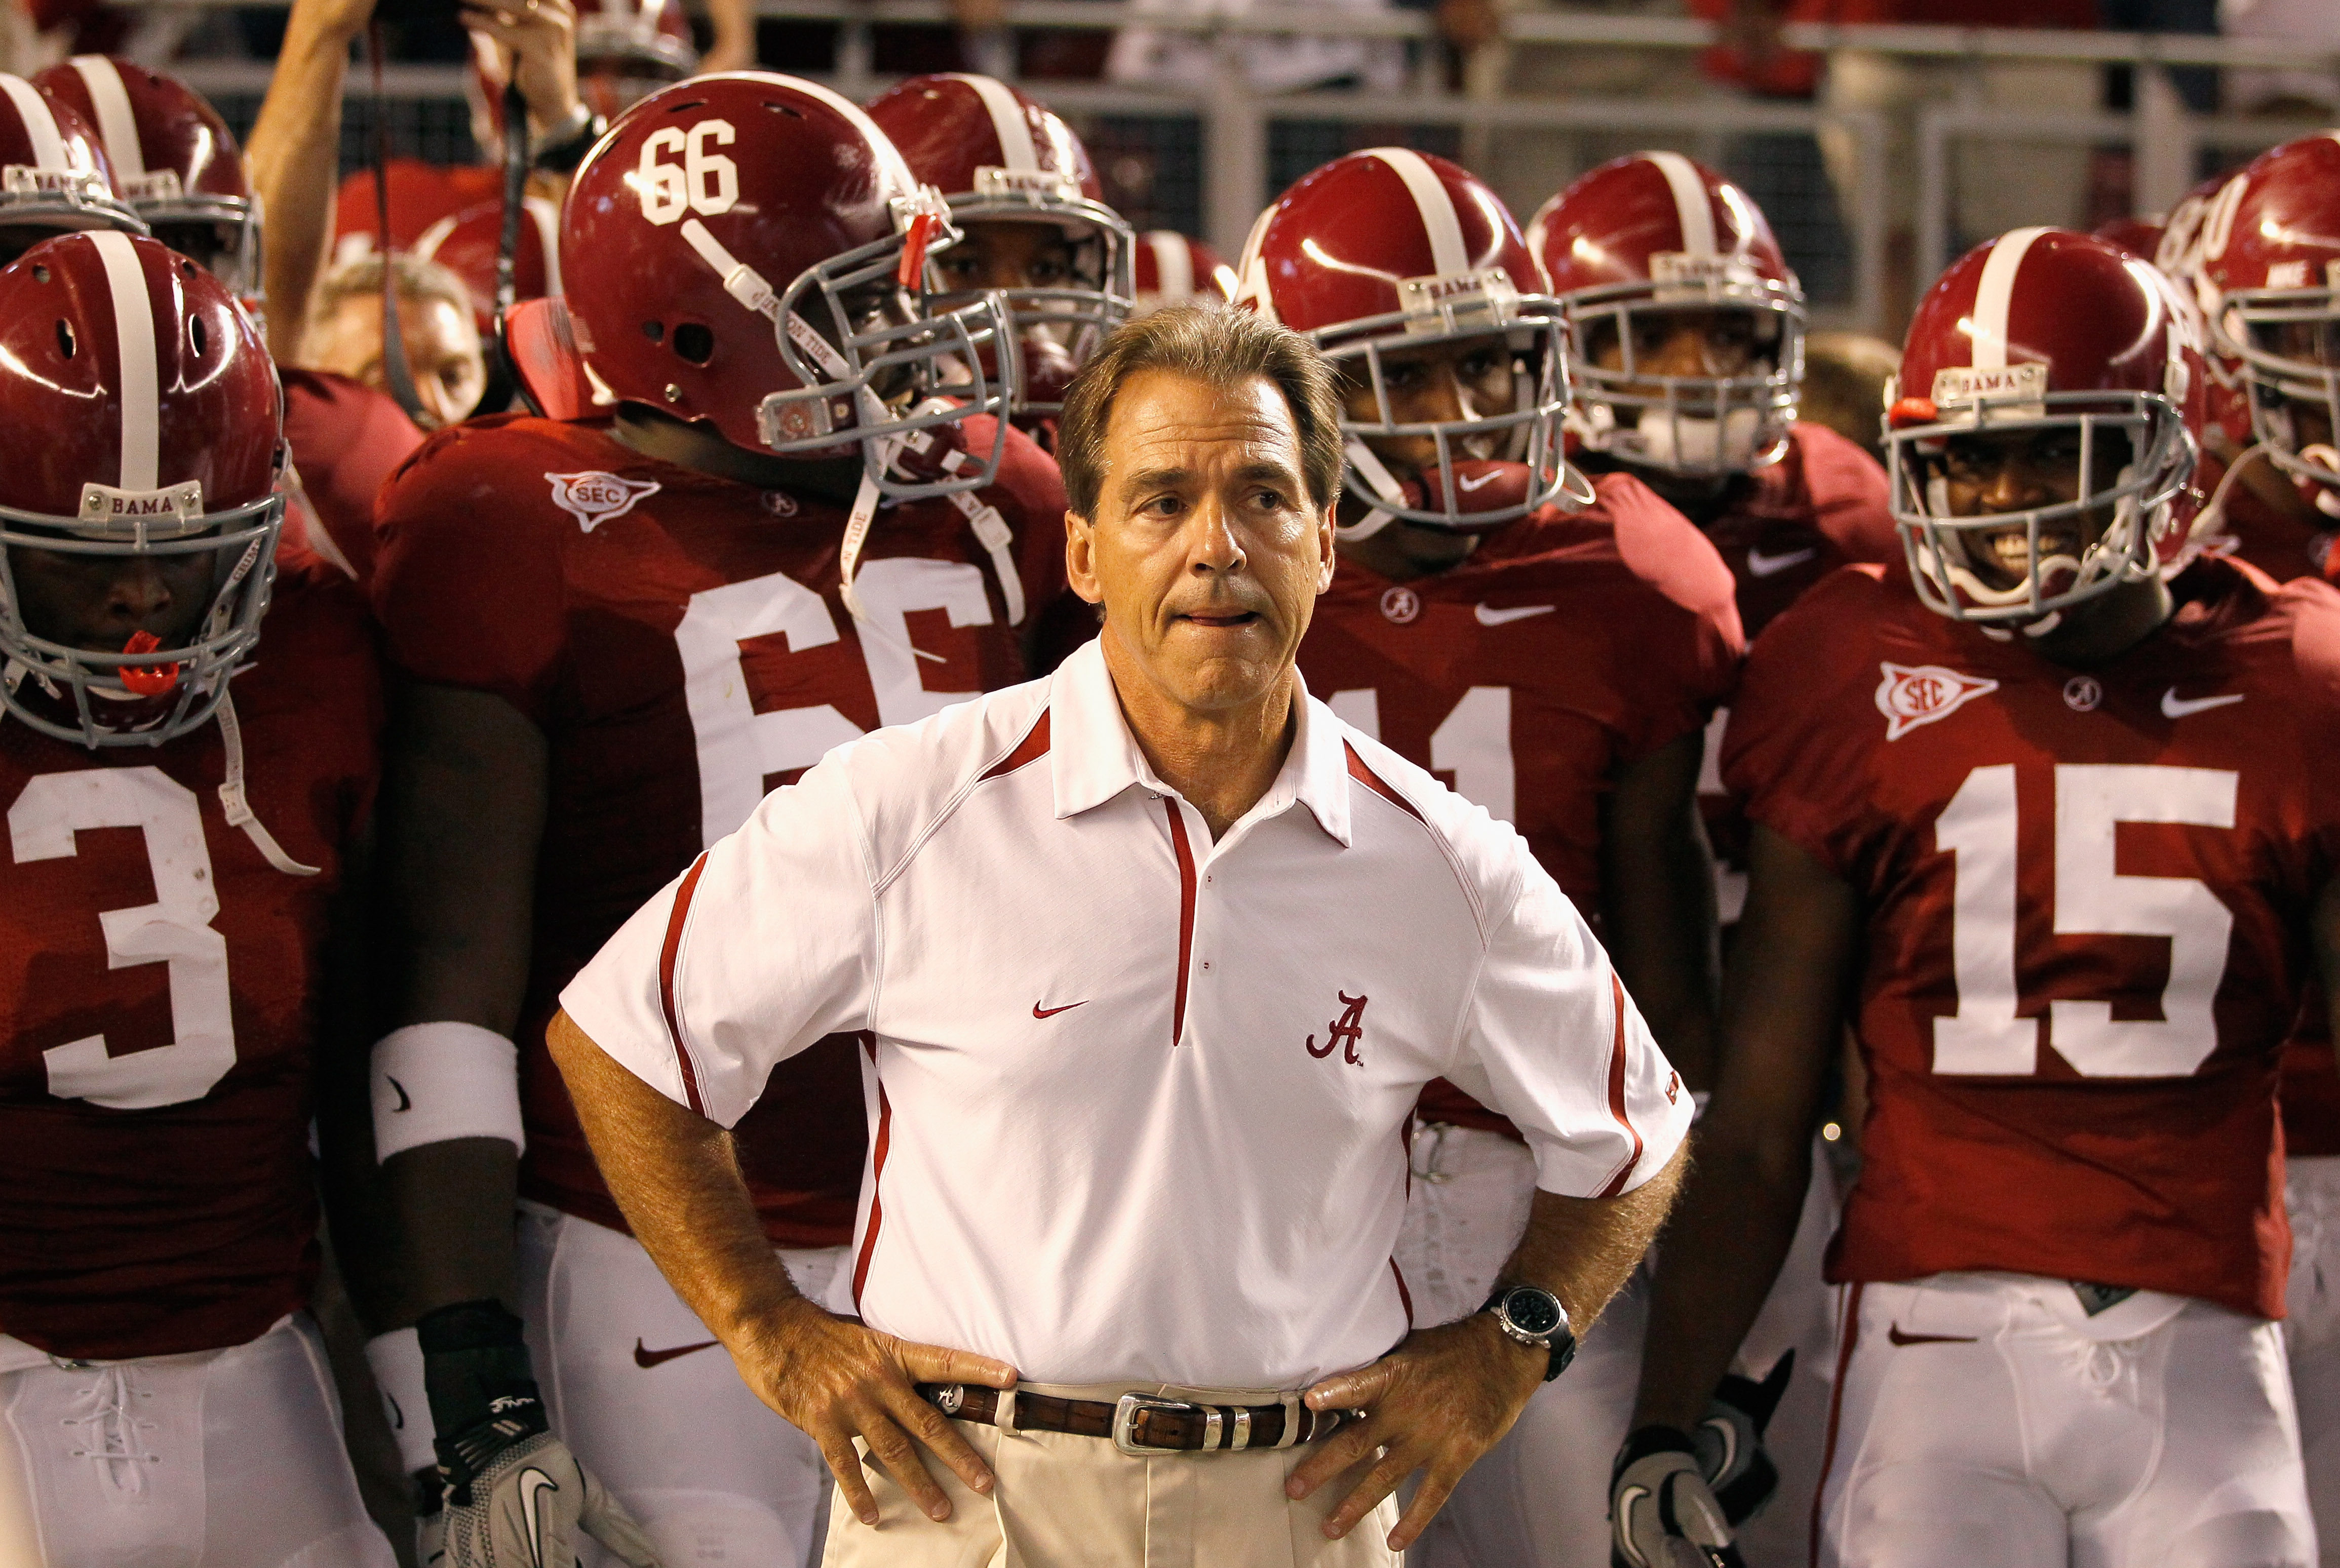 TUSCALOOSA, AL - OCTOBER 02:  Head coach Nick Saban of the Alabama Crimson Tide leads his team onto the field to face the Florida Gators at Bryant-Denny Stadium on October 2, 2010 in Tuscaloosa, Alabama.  (Photo by Kevin C. Cox/Getty Images)